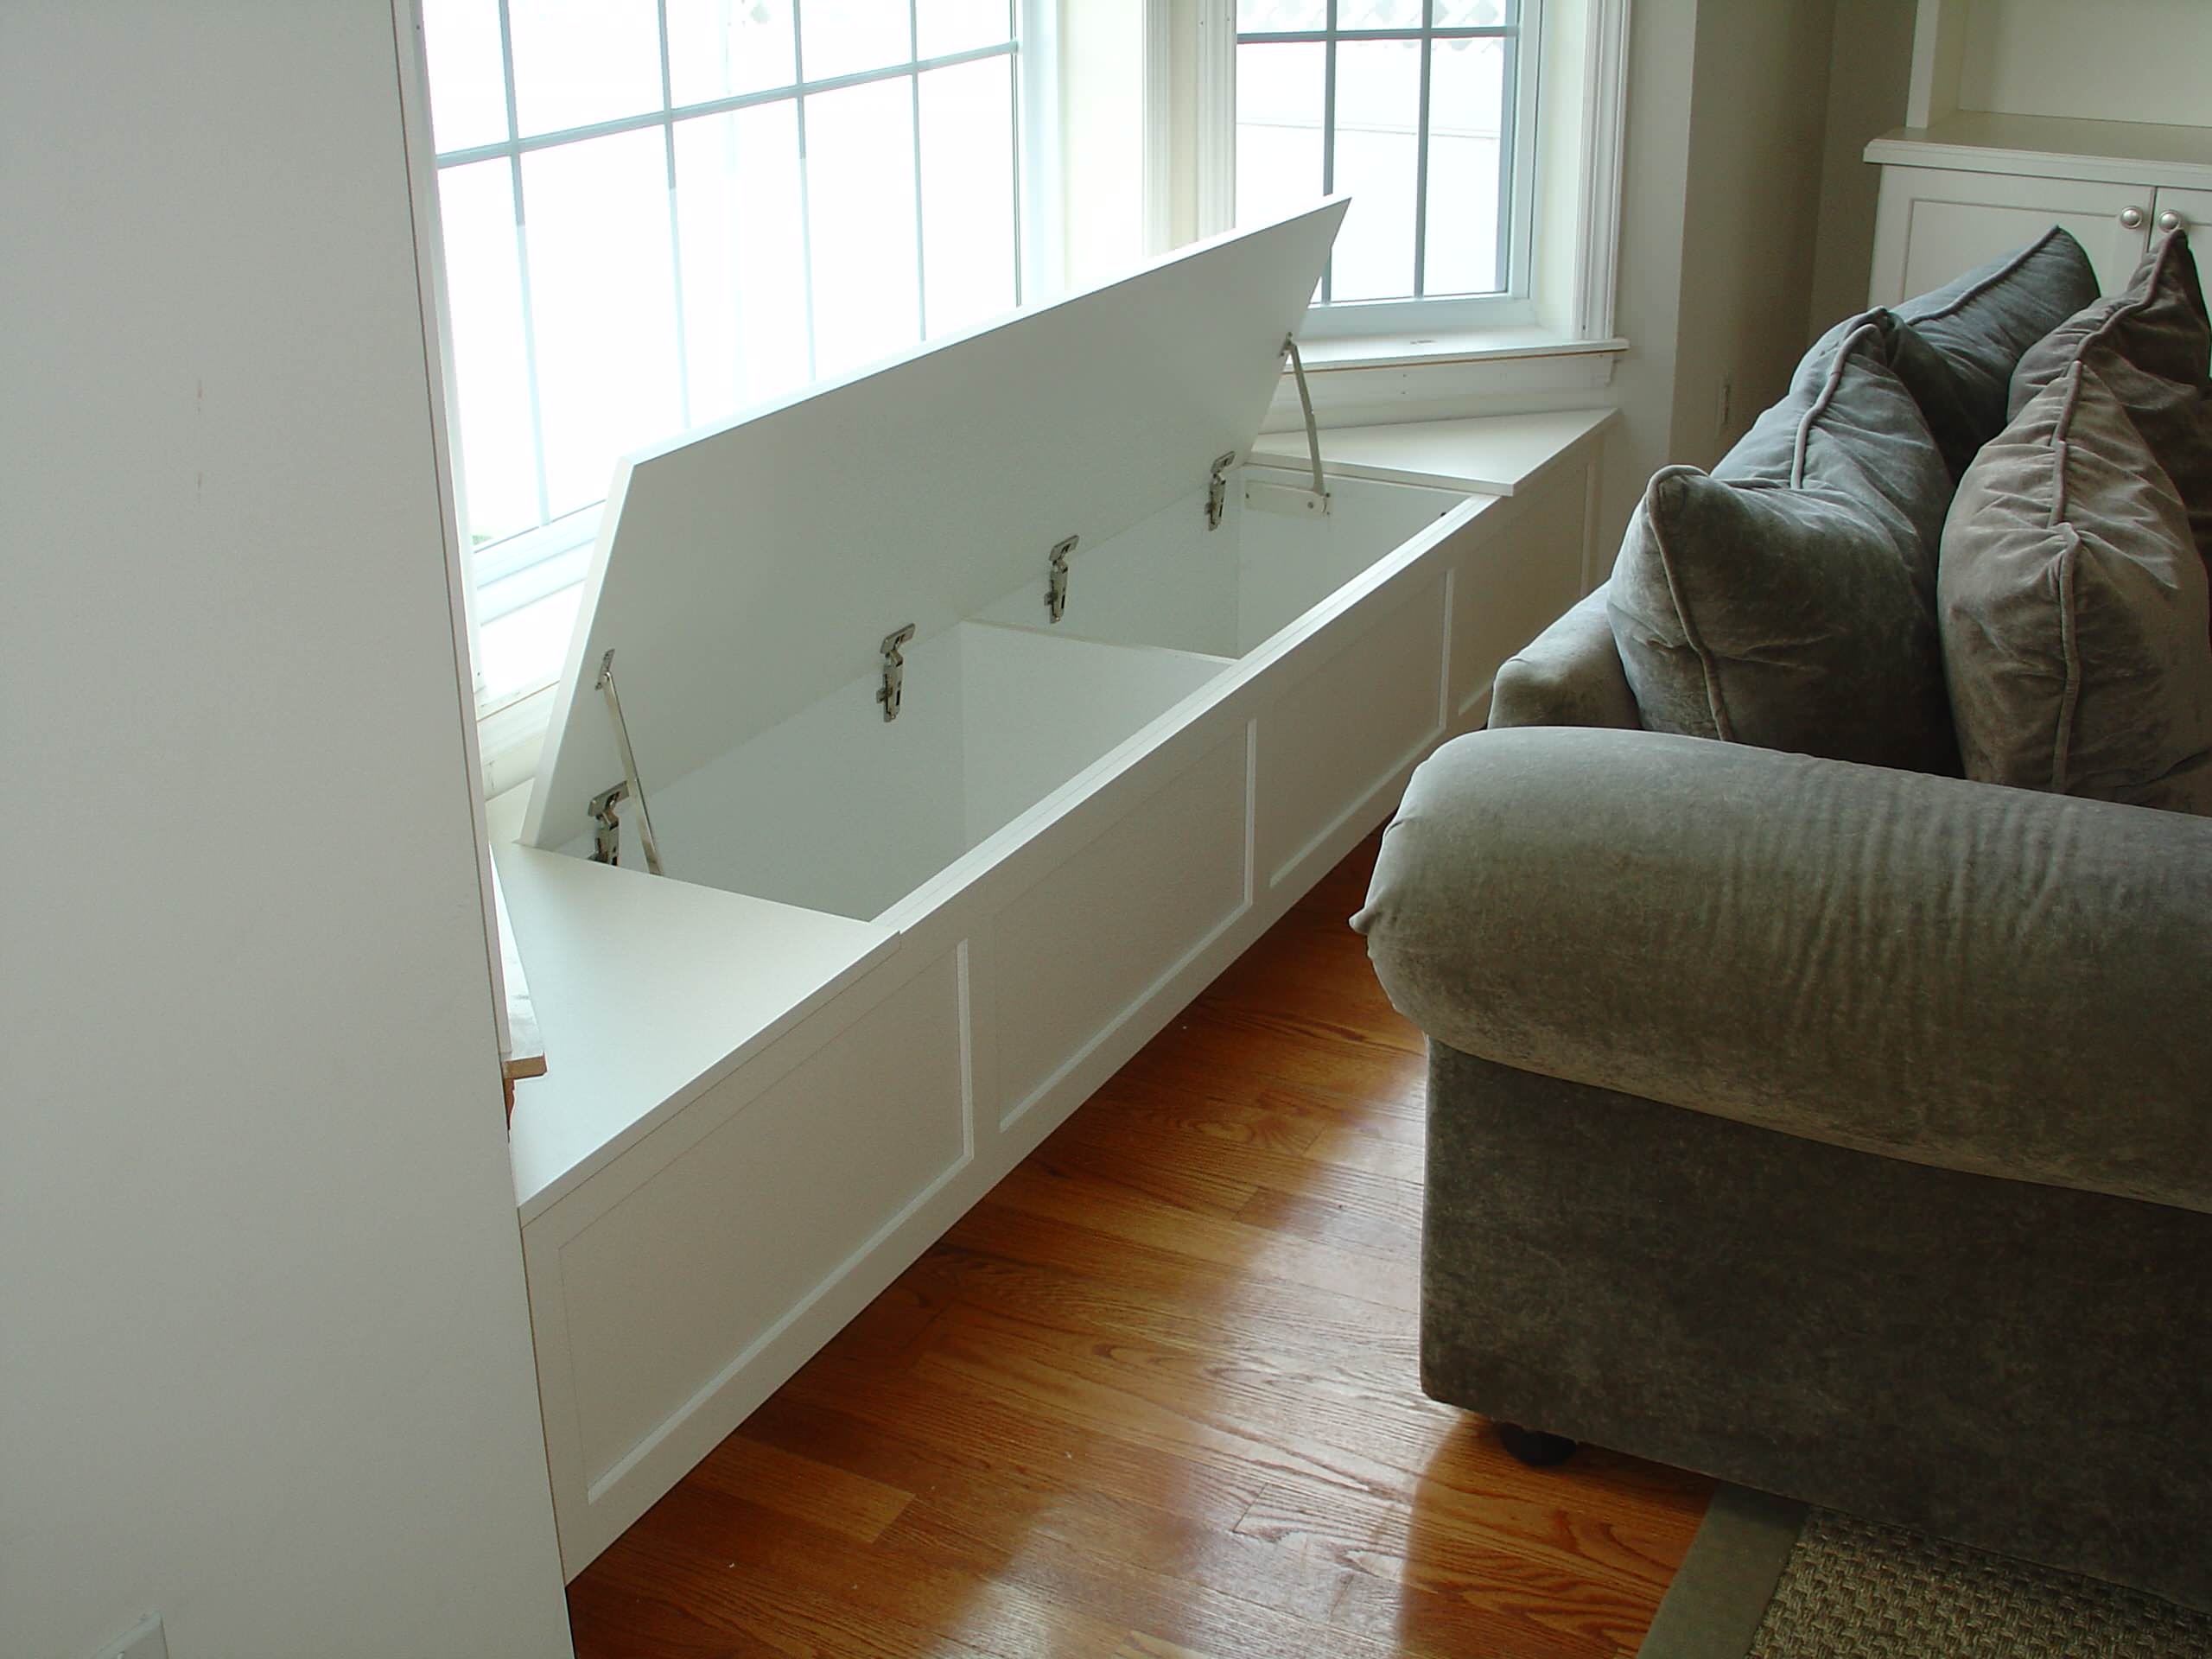 Built In Storage Benches Houzz, Living Room Bench Seating With Storage